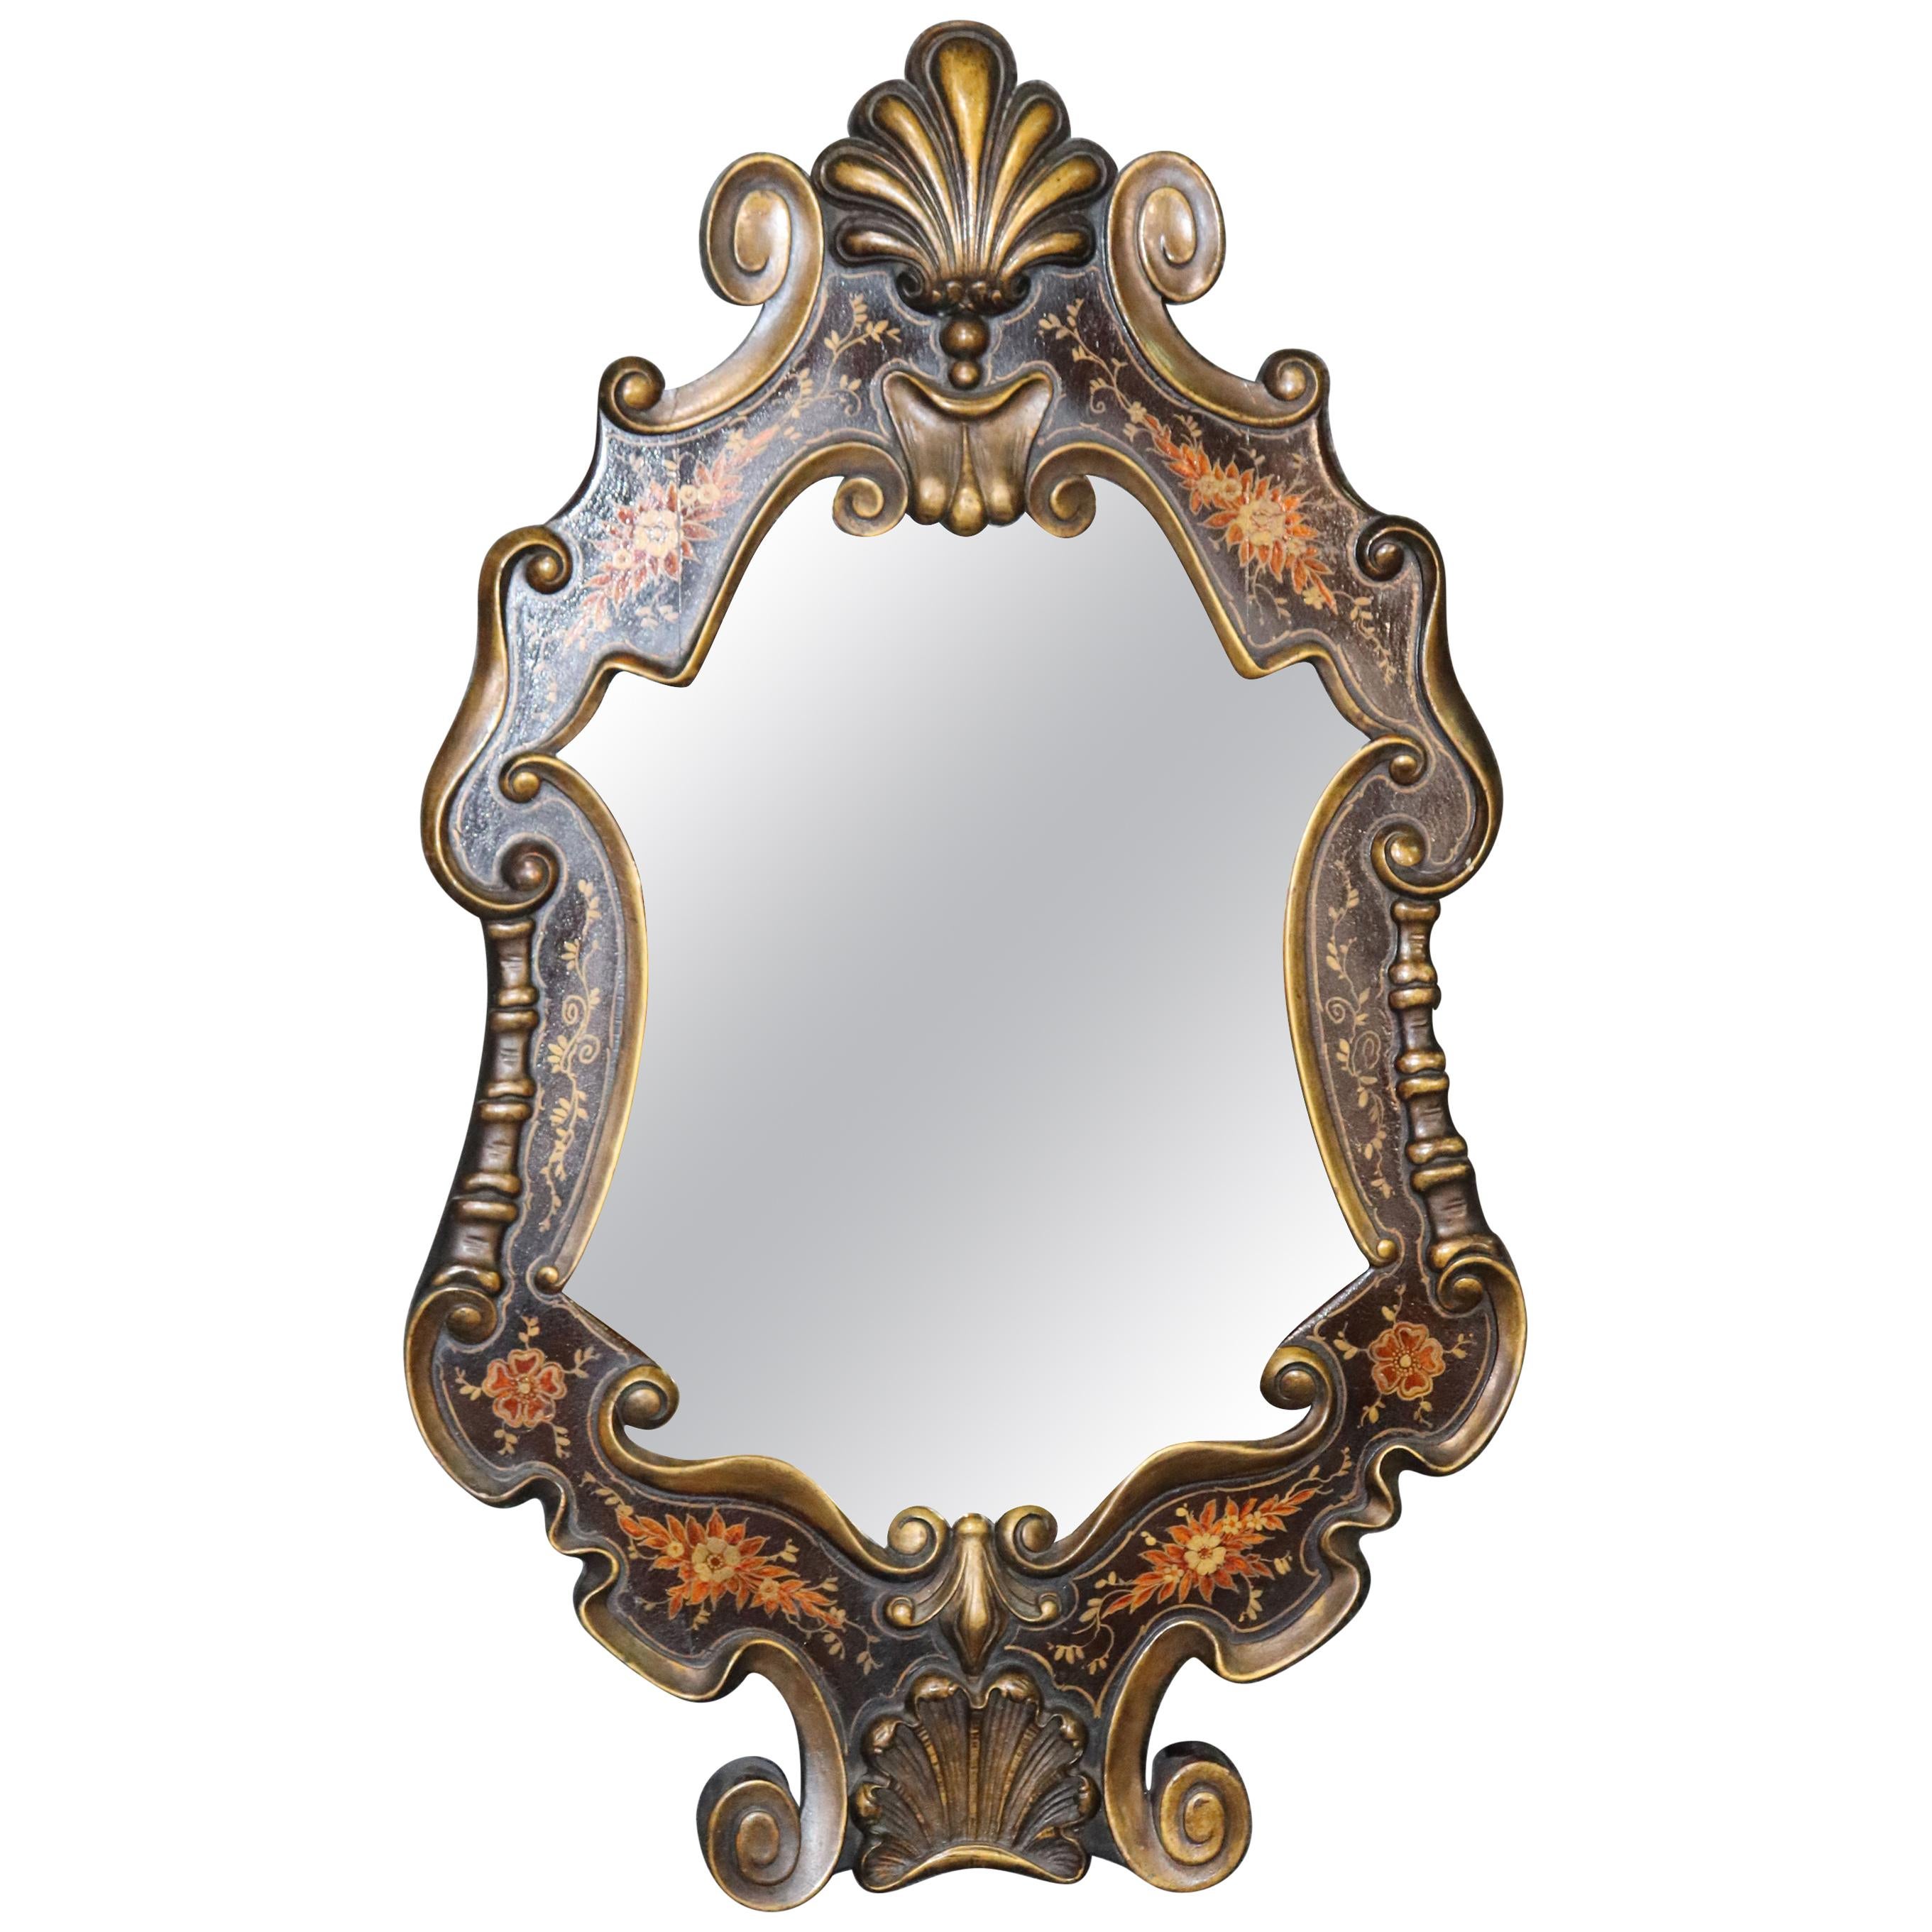 Hand-Paint Decorated Gilded Venetian Italian Wall Mirror, circa 1940 For Sale